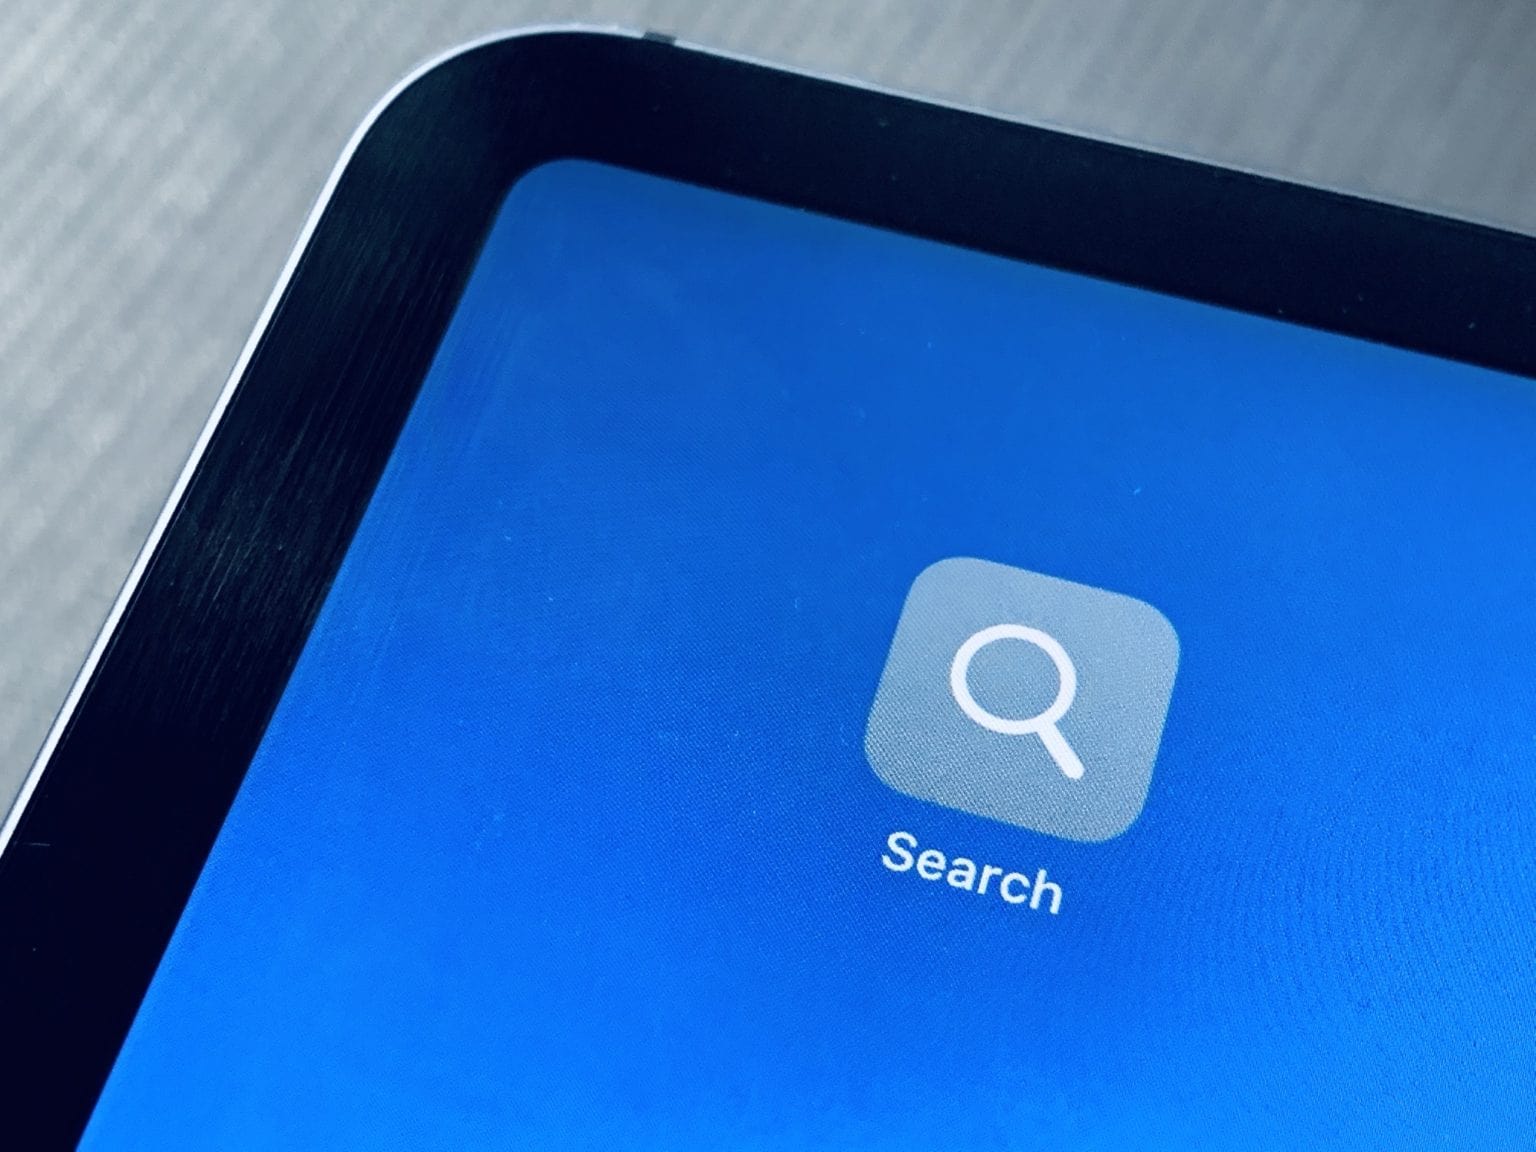 Add a custom search button to your Home screen on iPhone or iPad.